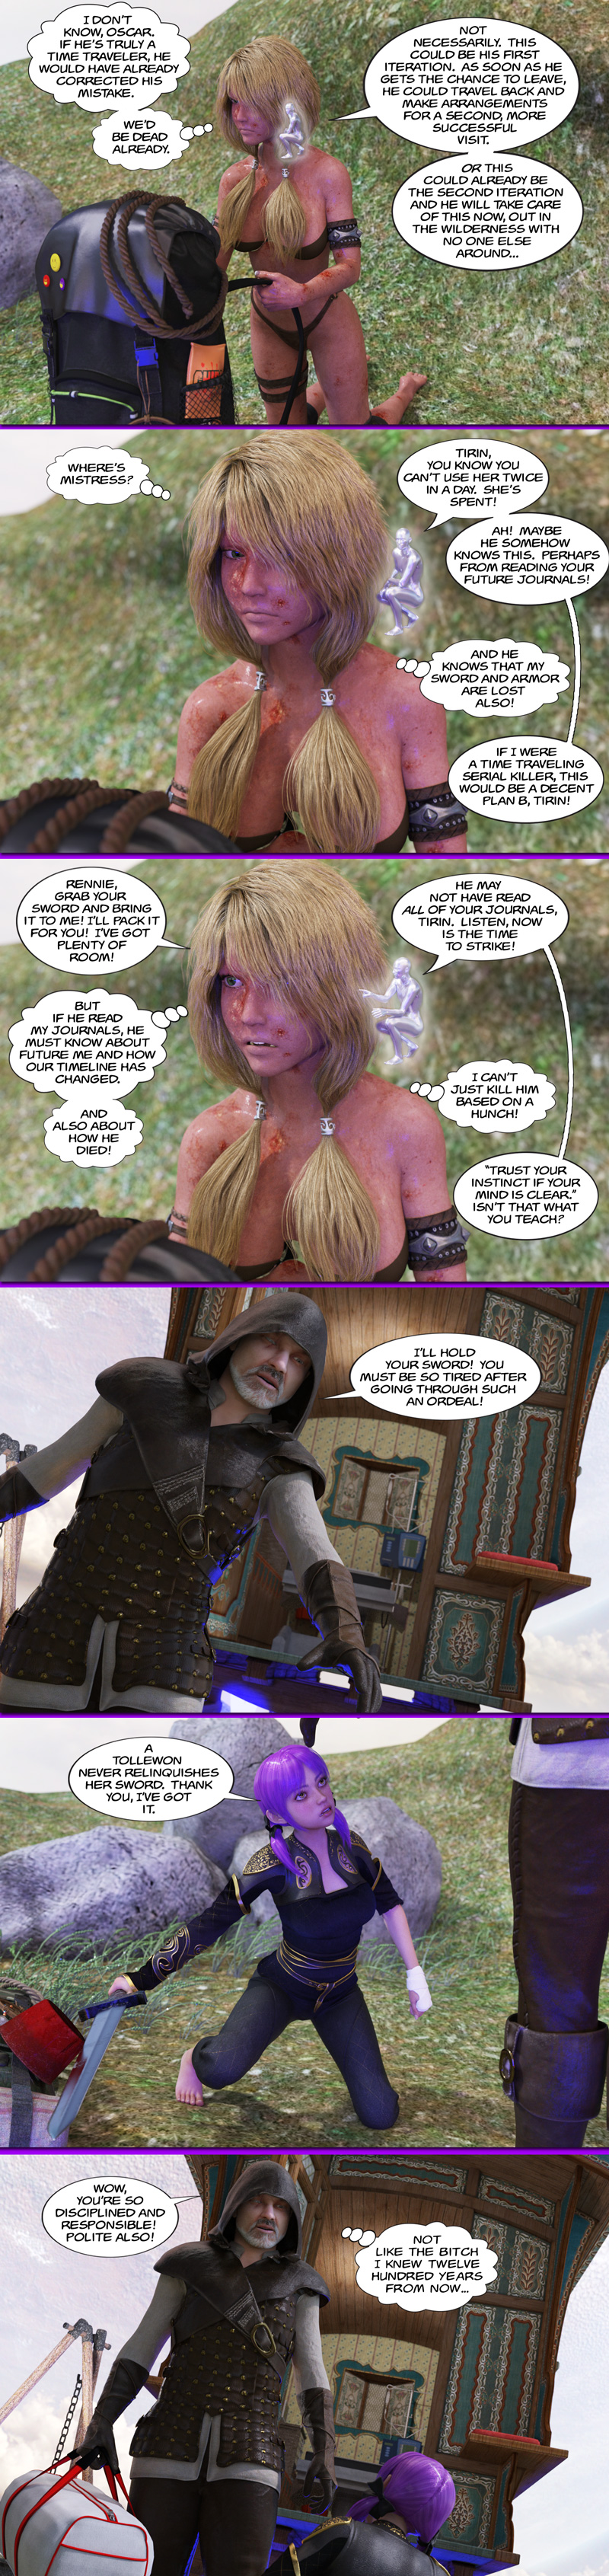 Chapter 17, page 39 – A Tollewon never relinquishes her sword